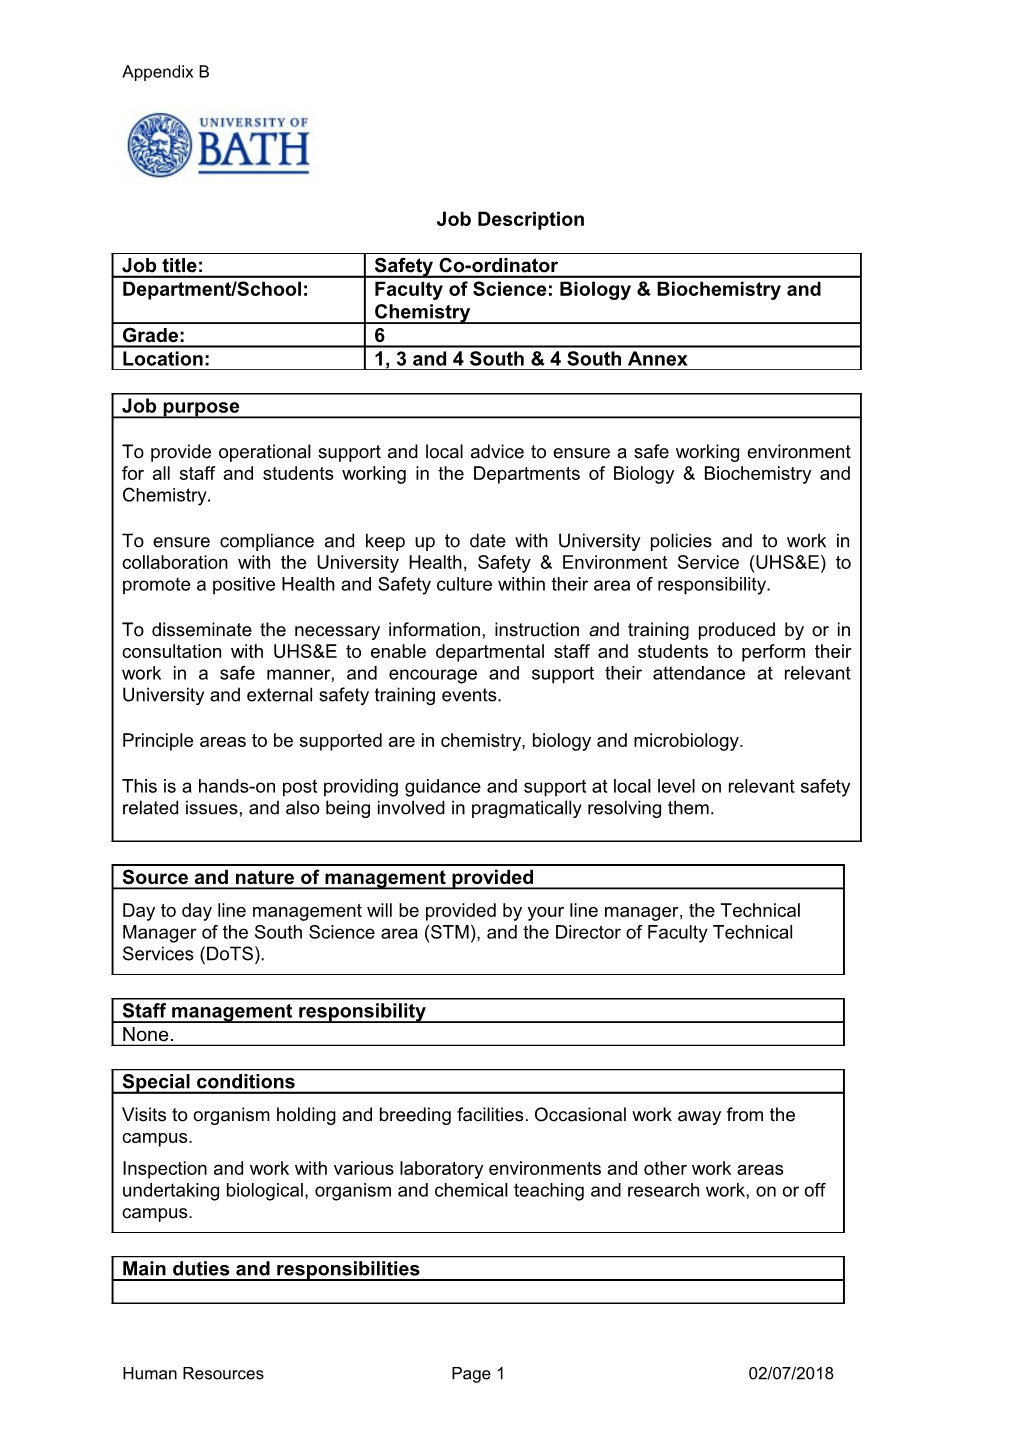 Person Specification s28